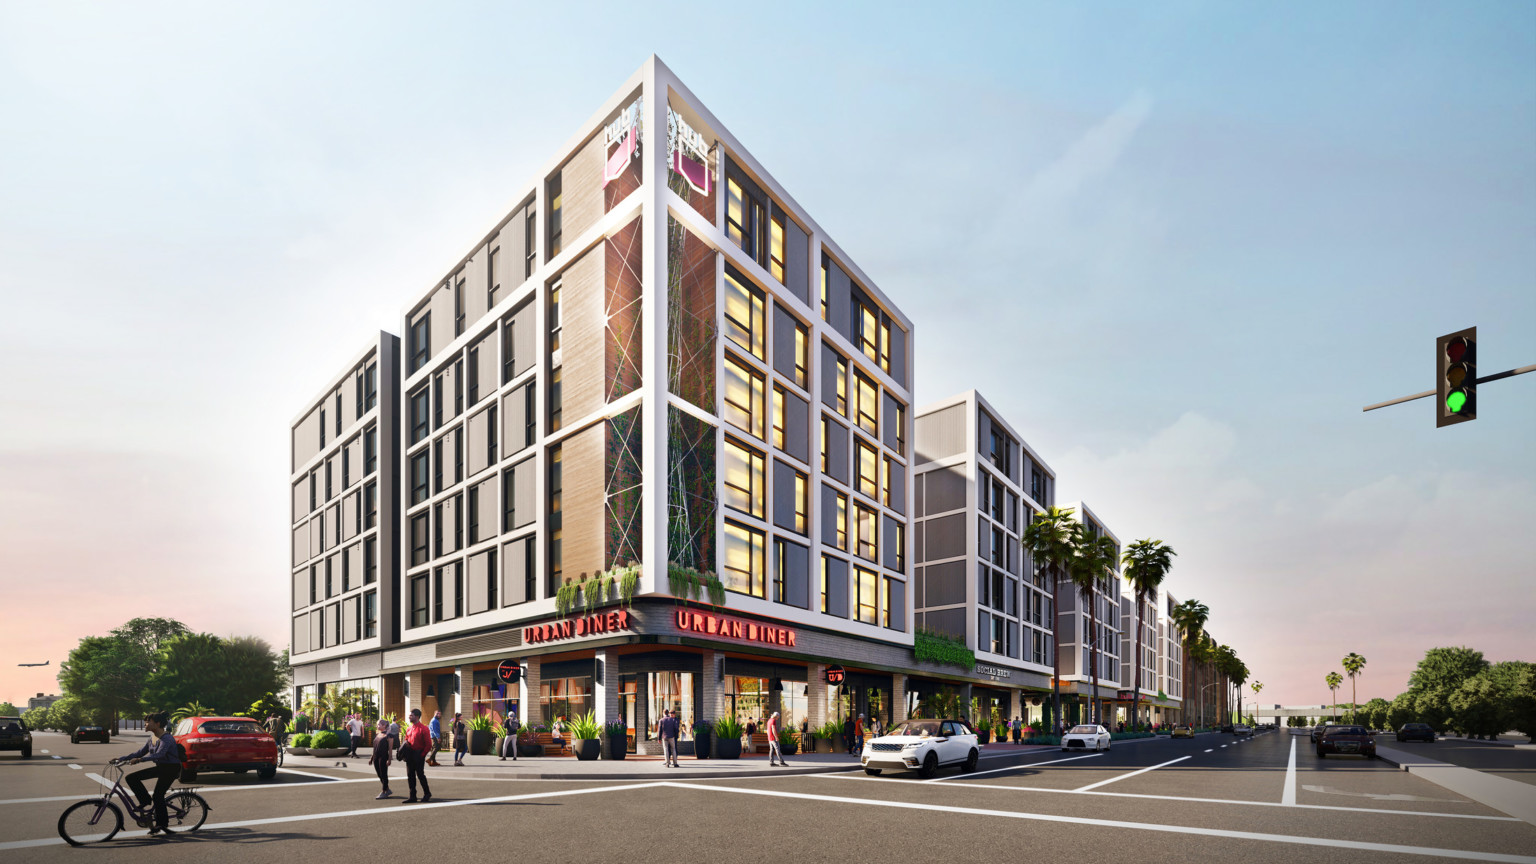 HUB Fullerton design rendering, a mixed use student housing facility located near California State University-Fullerton